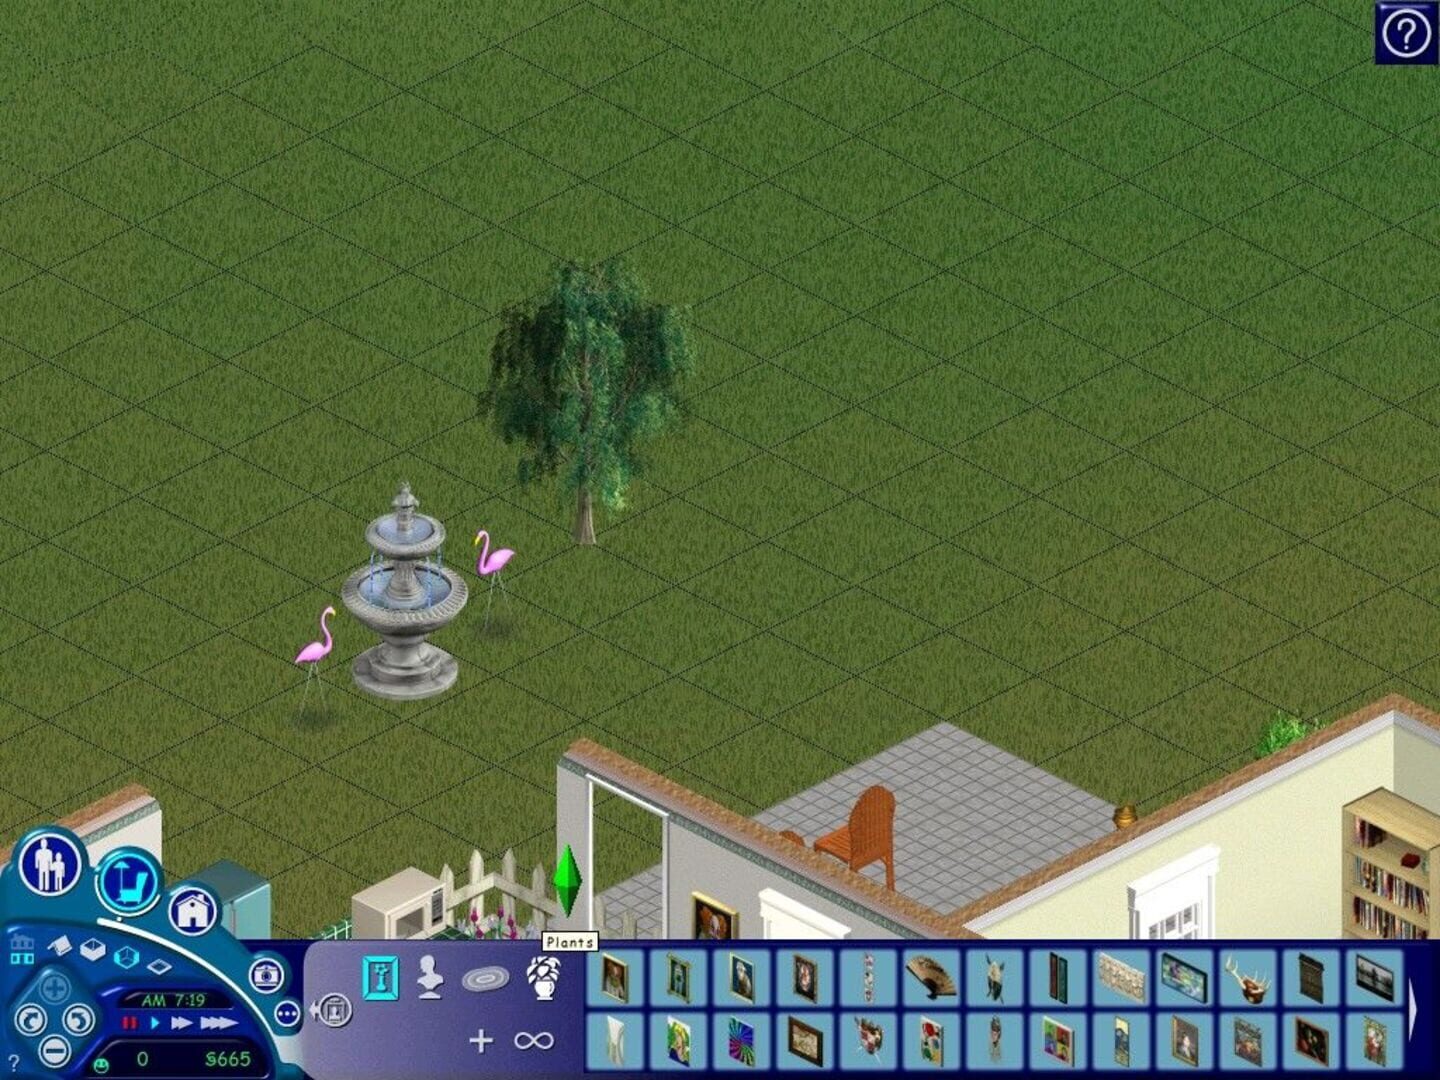 Sims 1 купить. Симс 3 complete collection. The SIMS 1 антология. The SIMS 1 complete collection. Симс 1 геймплей.